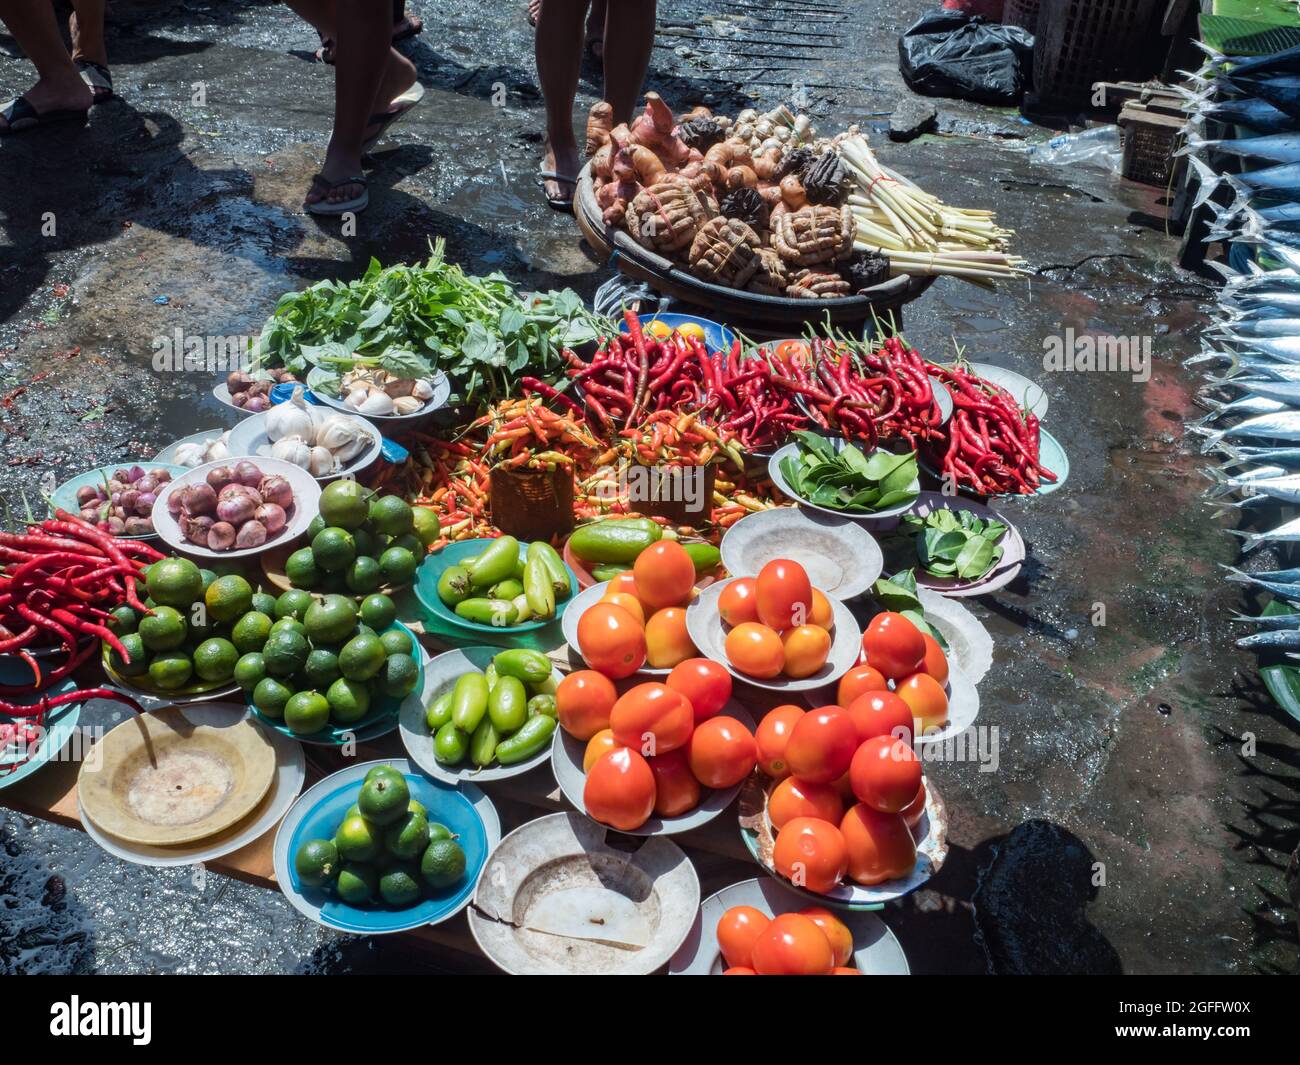 Ambon, Indonesia - Feb 2018; Different types of vegetables and fruits at the local market in the town of Ambon on the island of Ambon, Maluku Archipel Stock Photo